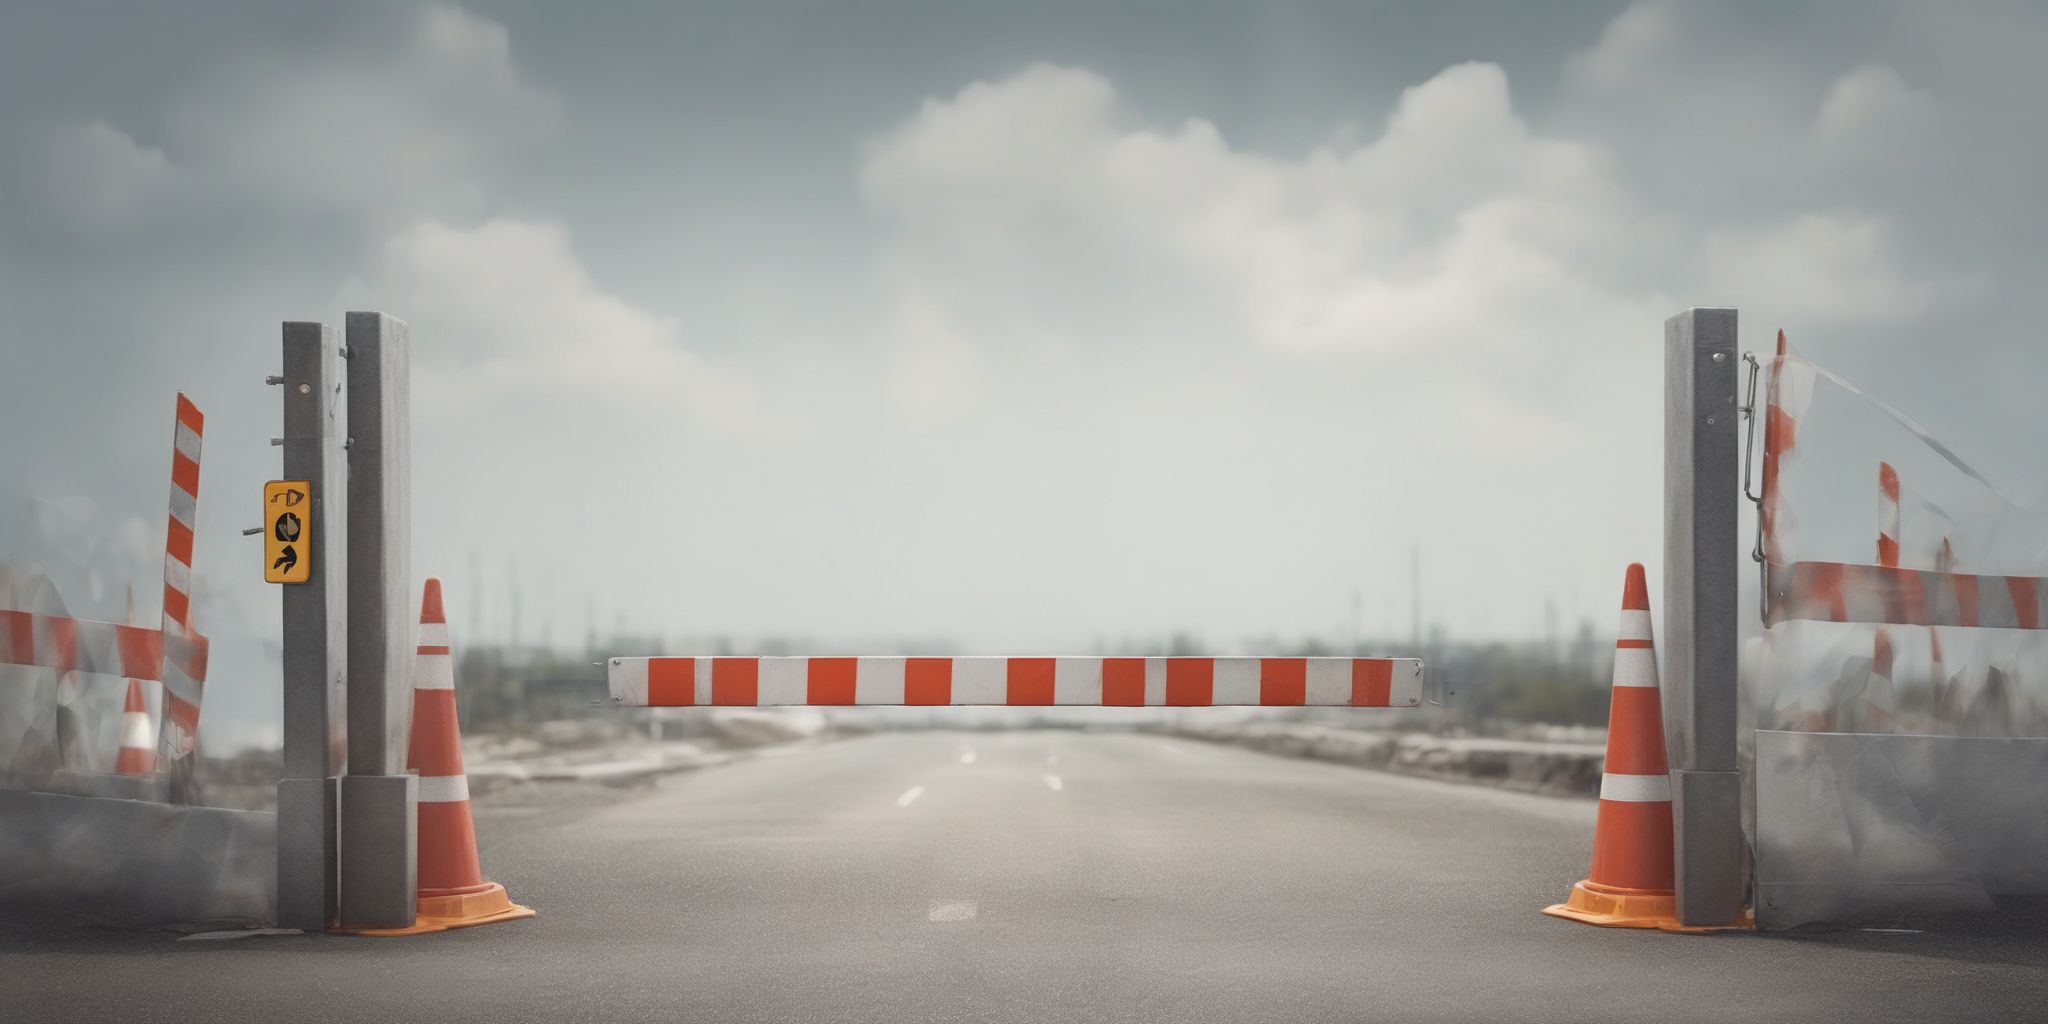 Barrier  in realistic, photographic style